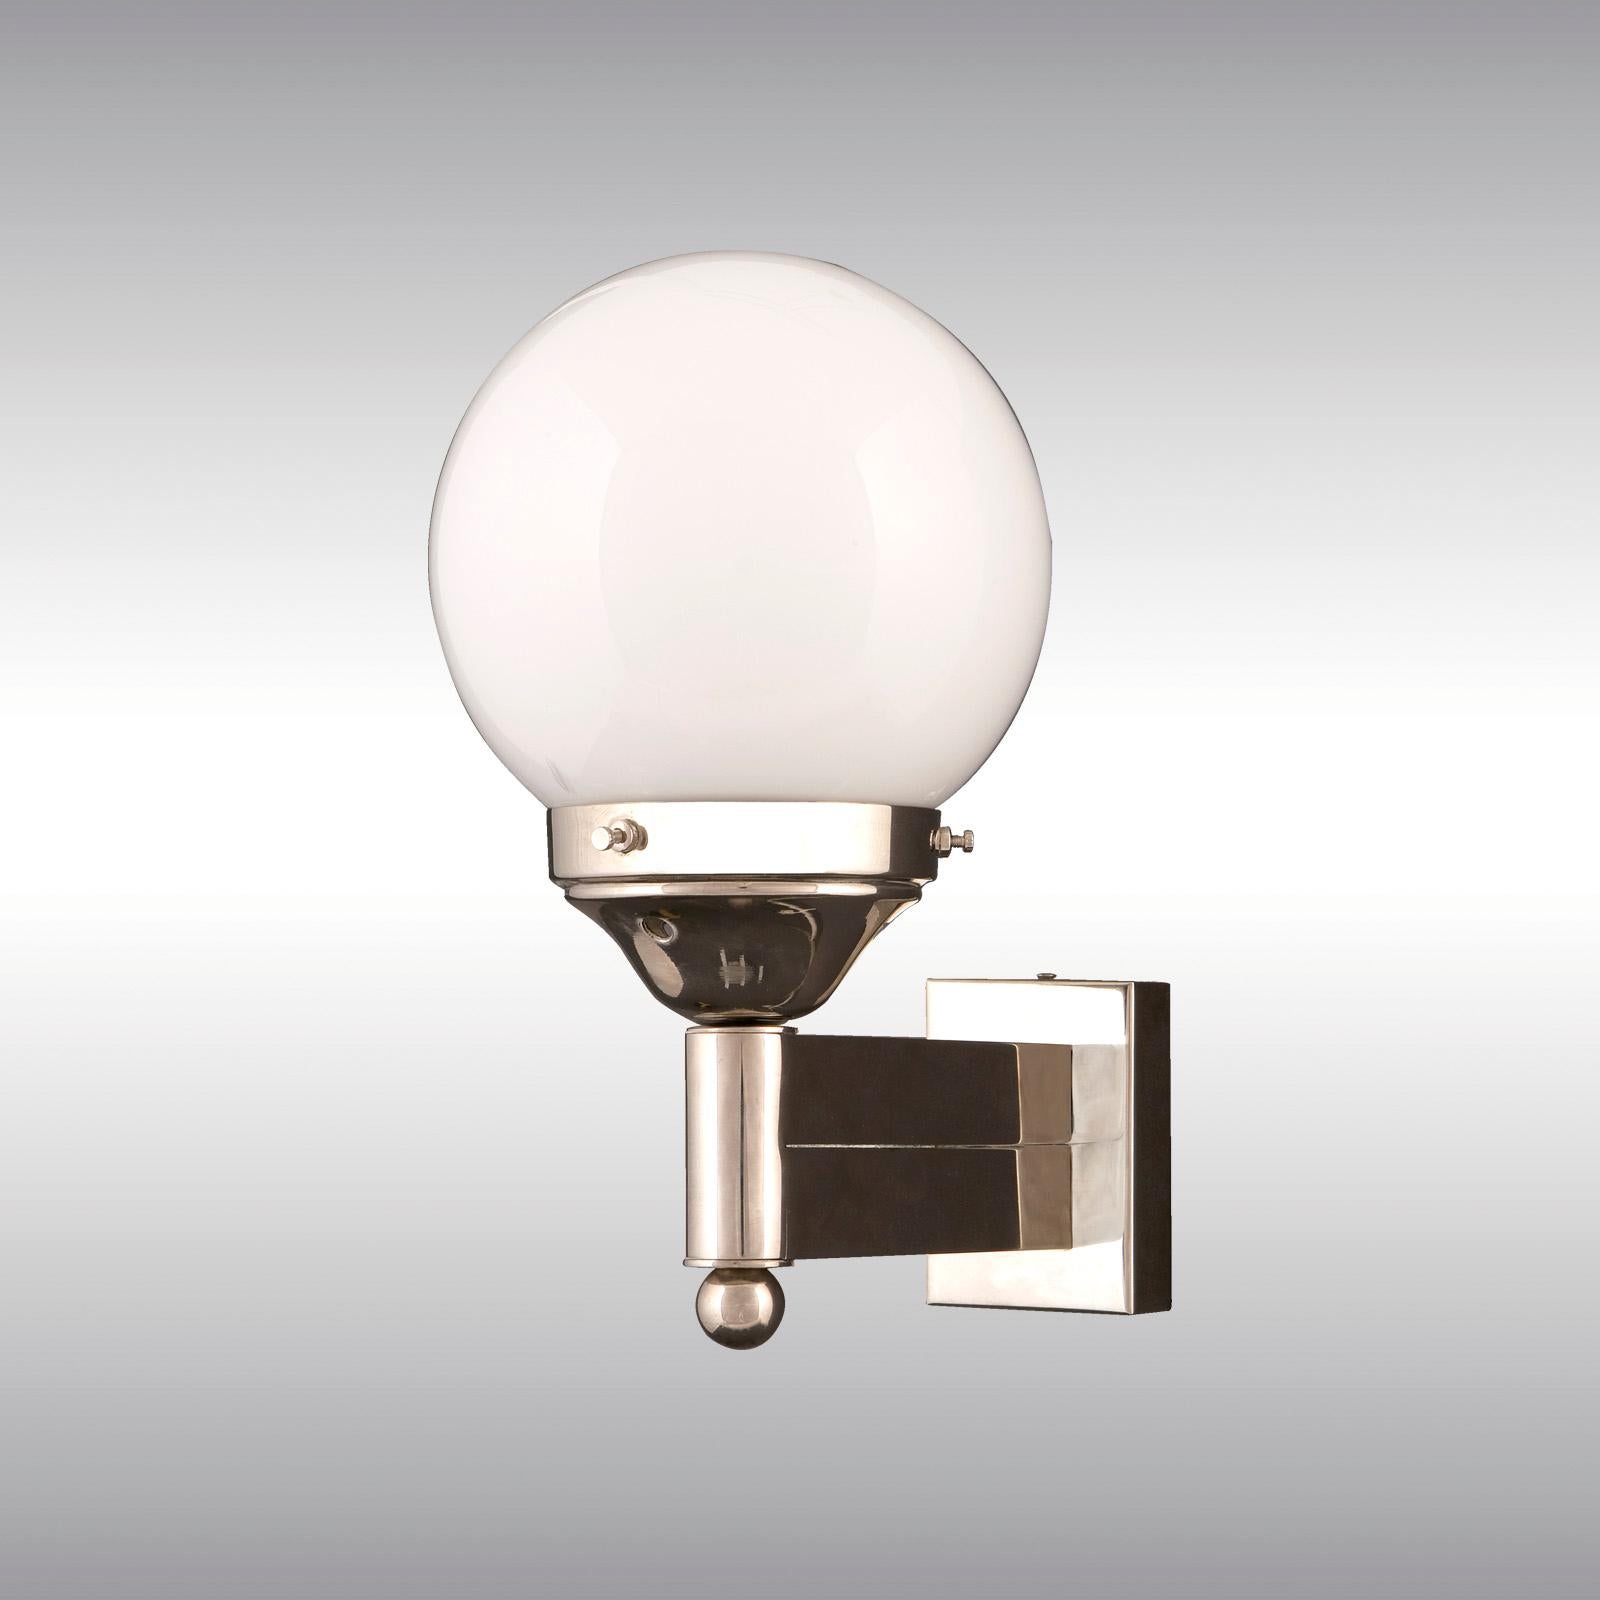 Wall light with opaline glass ball.

Most components according to the UL regulations, with an additional charge we will UL-list and label our fixtures.